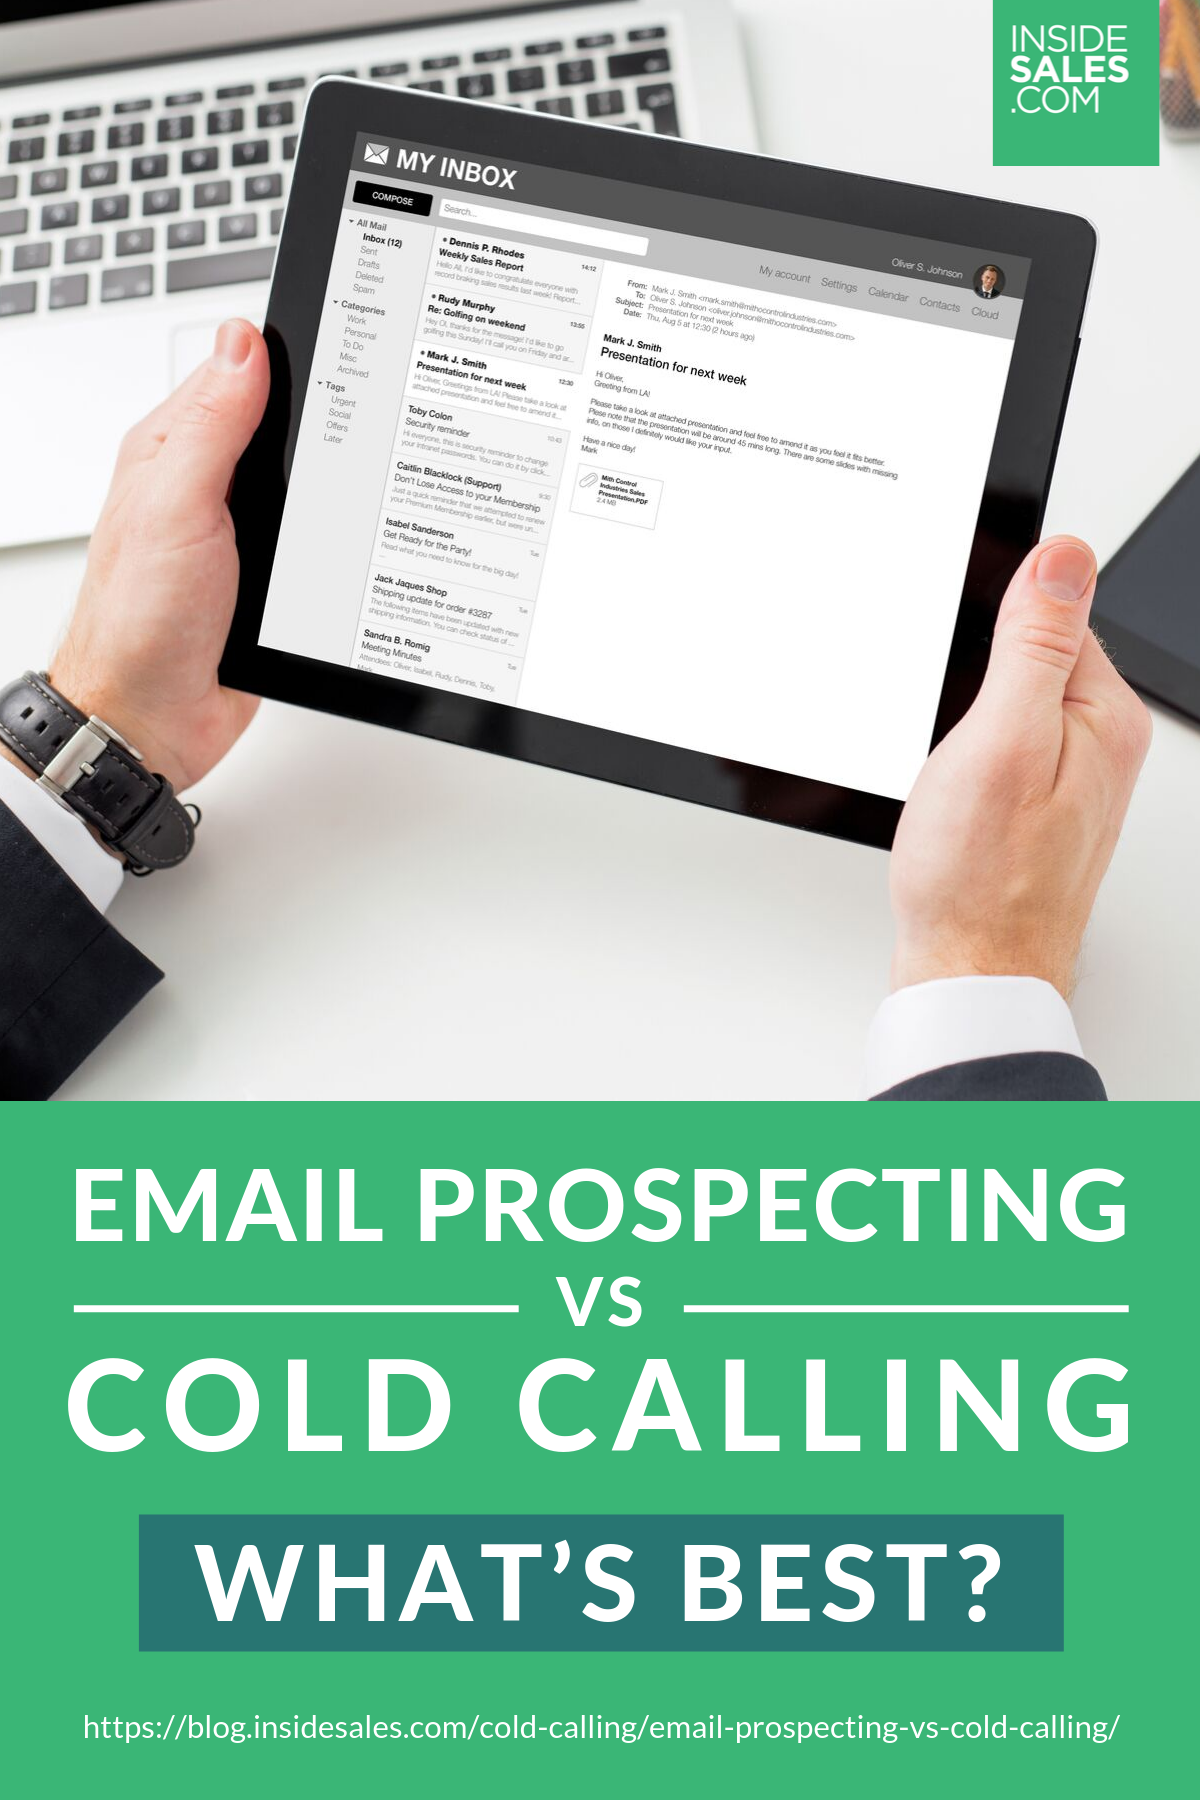 Email Prospecting vs Cold Calling: What’s Best? https://www.insidesales.com/blog/cold-calling/email-prospecting-vs-cold-calling/